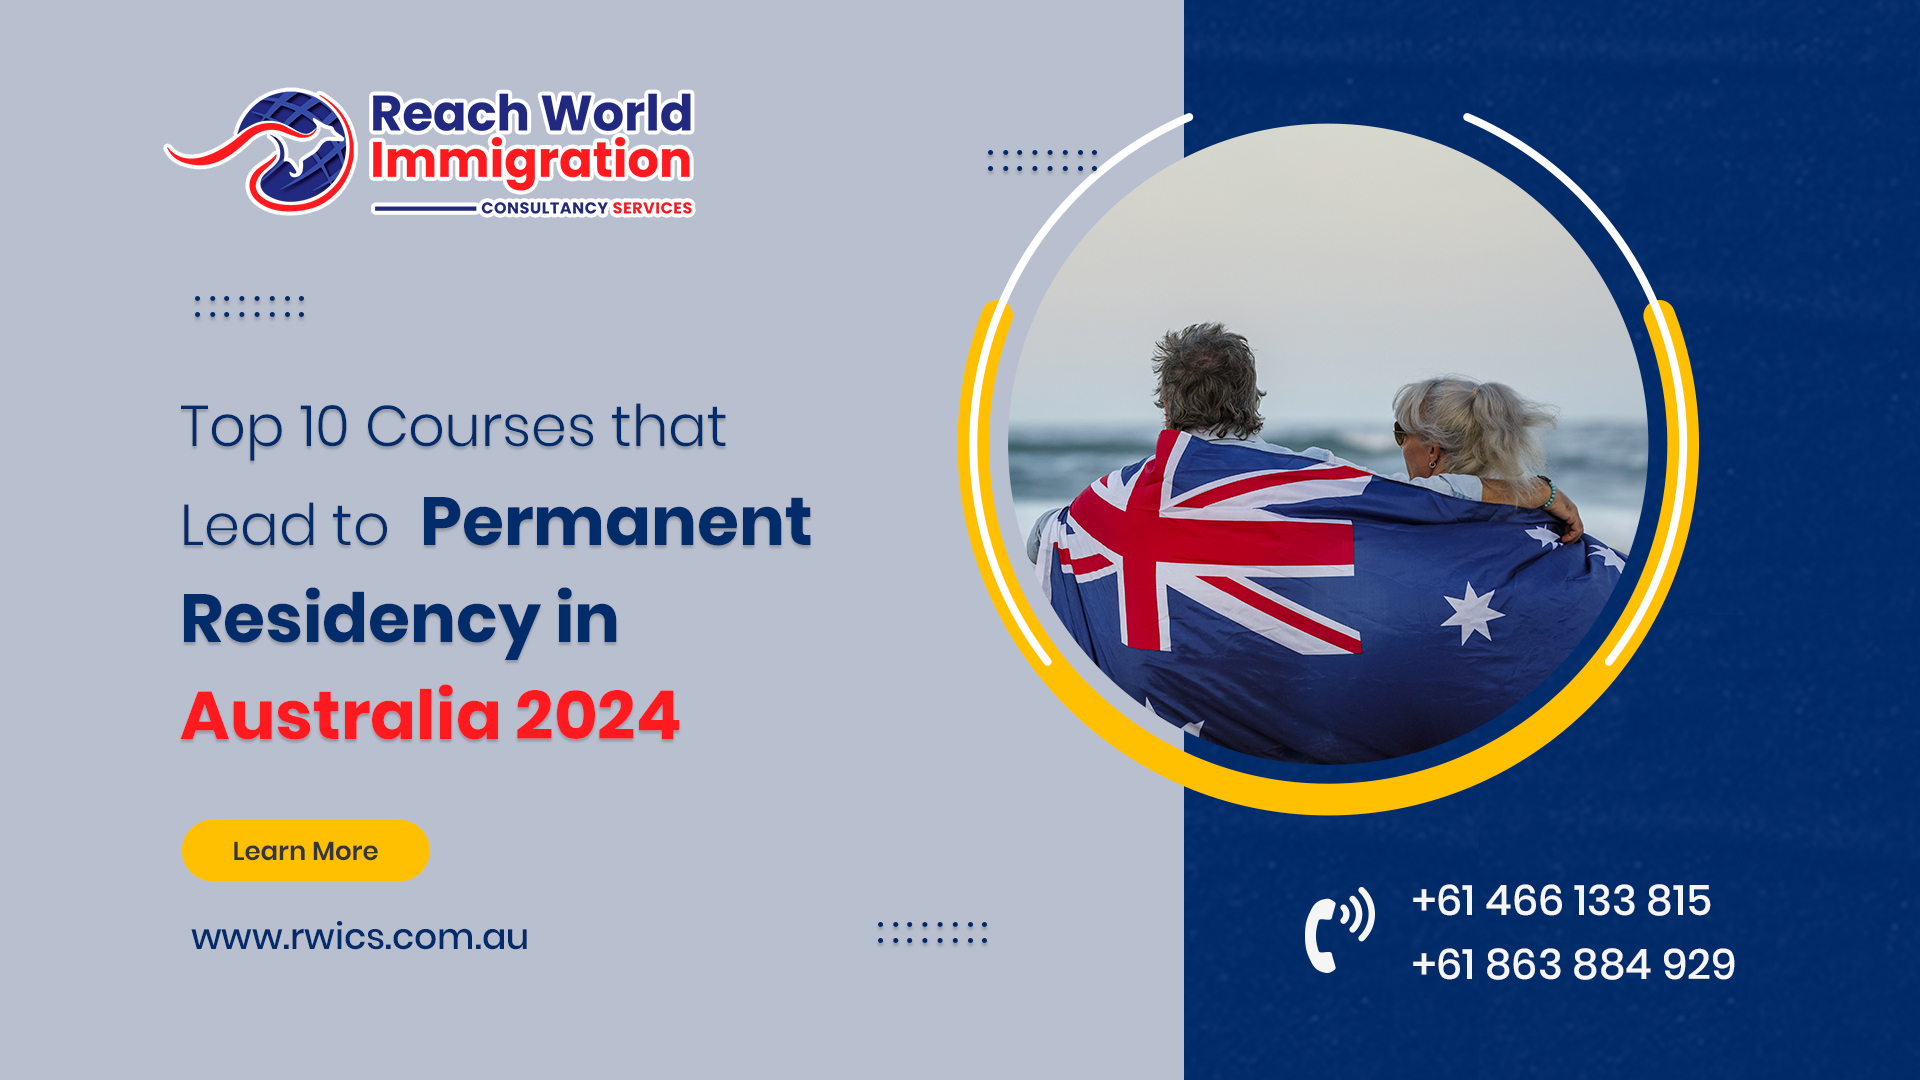 Top 10 Courses that Lead to Permanent Residency in Australia 2024